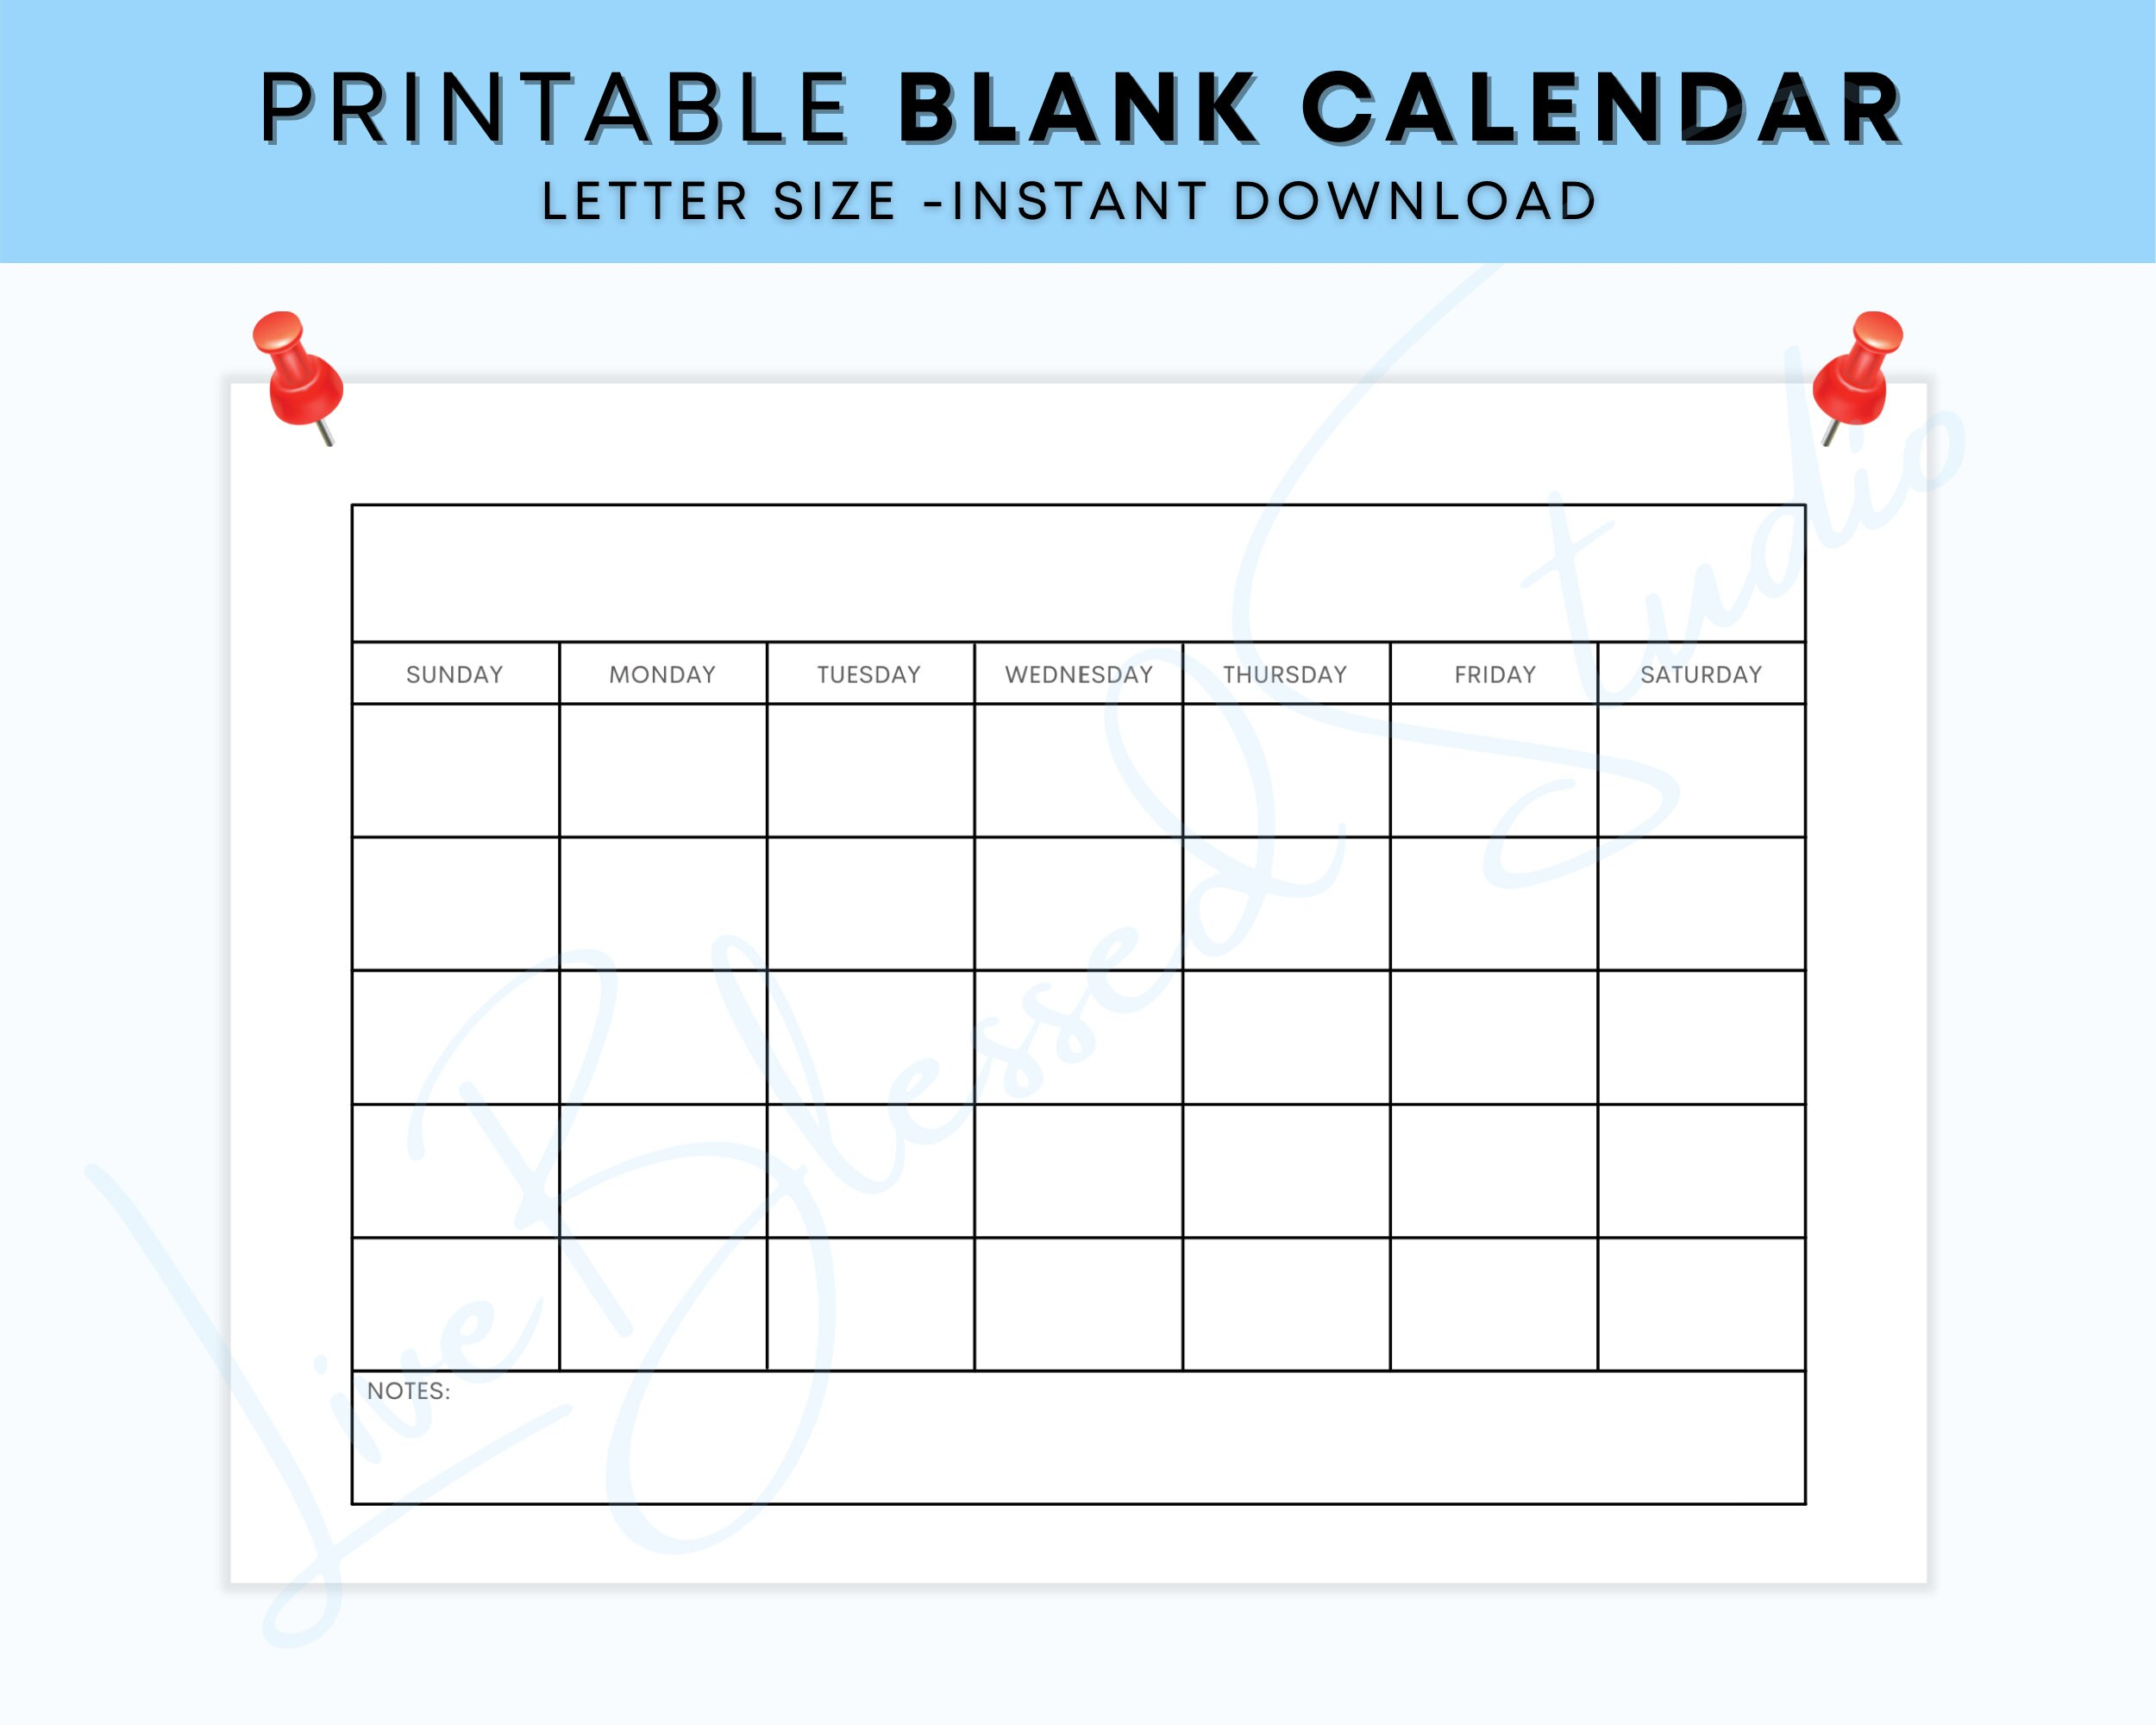 8 5 X 11 Inch Blank Calendar Page Template Includes Sun